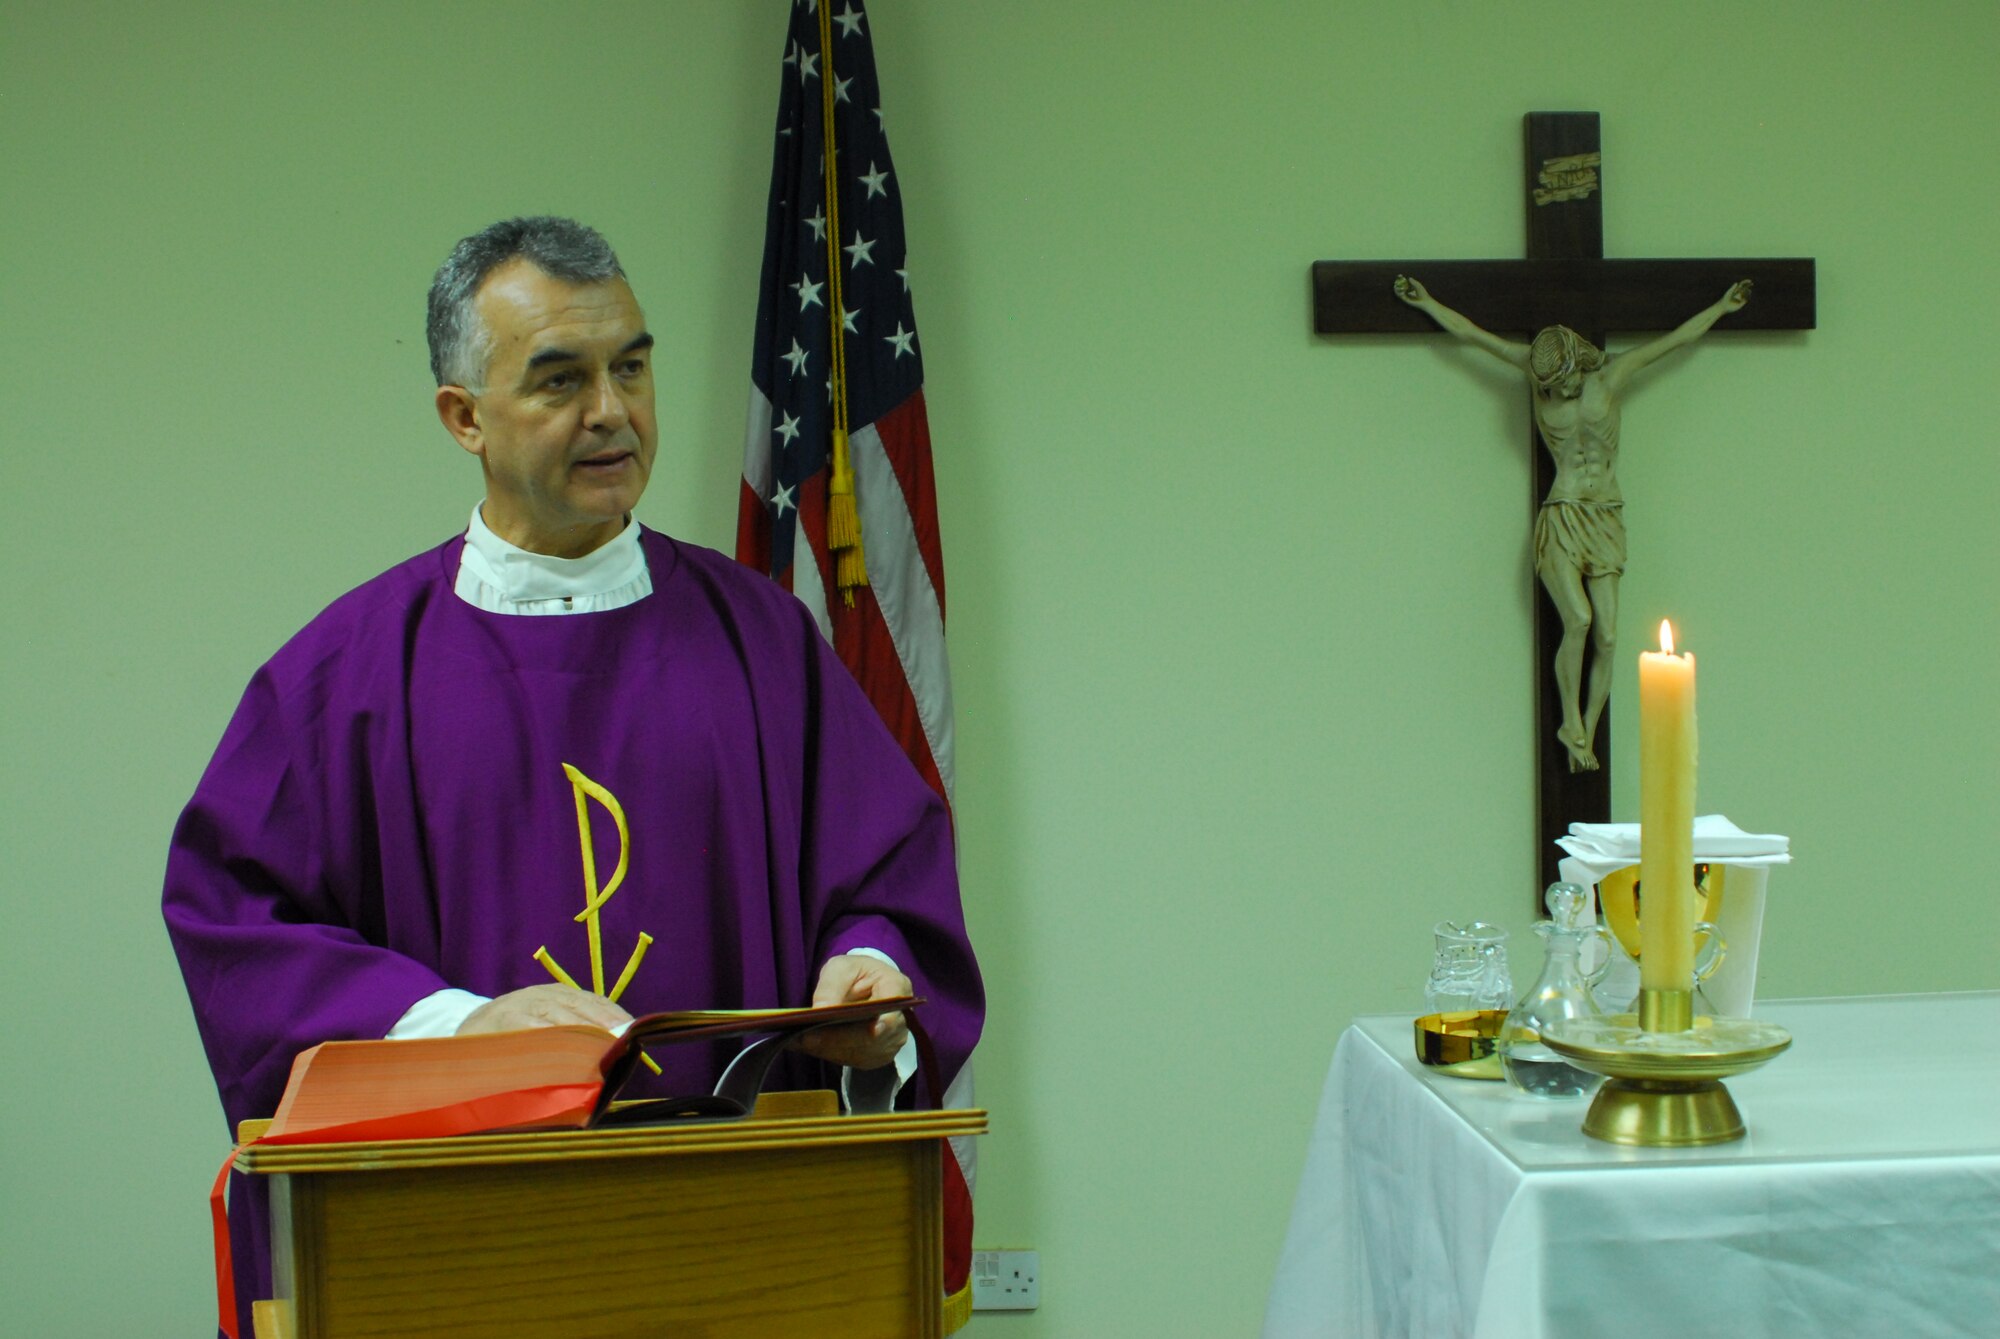 Chaplain (Lt. Col.) Jacek Kowalik, 332nd Air Expeditionary Wing Catholic priest, reads from the Gospels at a Mass held Nov. 28, 2011 at an undisclosed location in Southwest Asia. Kowalik is a native of Parszow, Poland and is deployed from Spangdahlem Air Base, Germany. (U.S. Air Force photo by 1st Lt. Rusty Ridley)